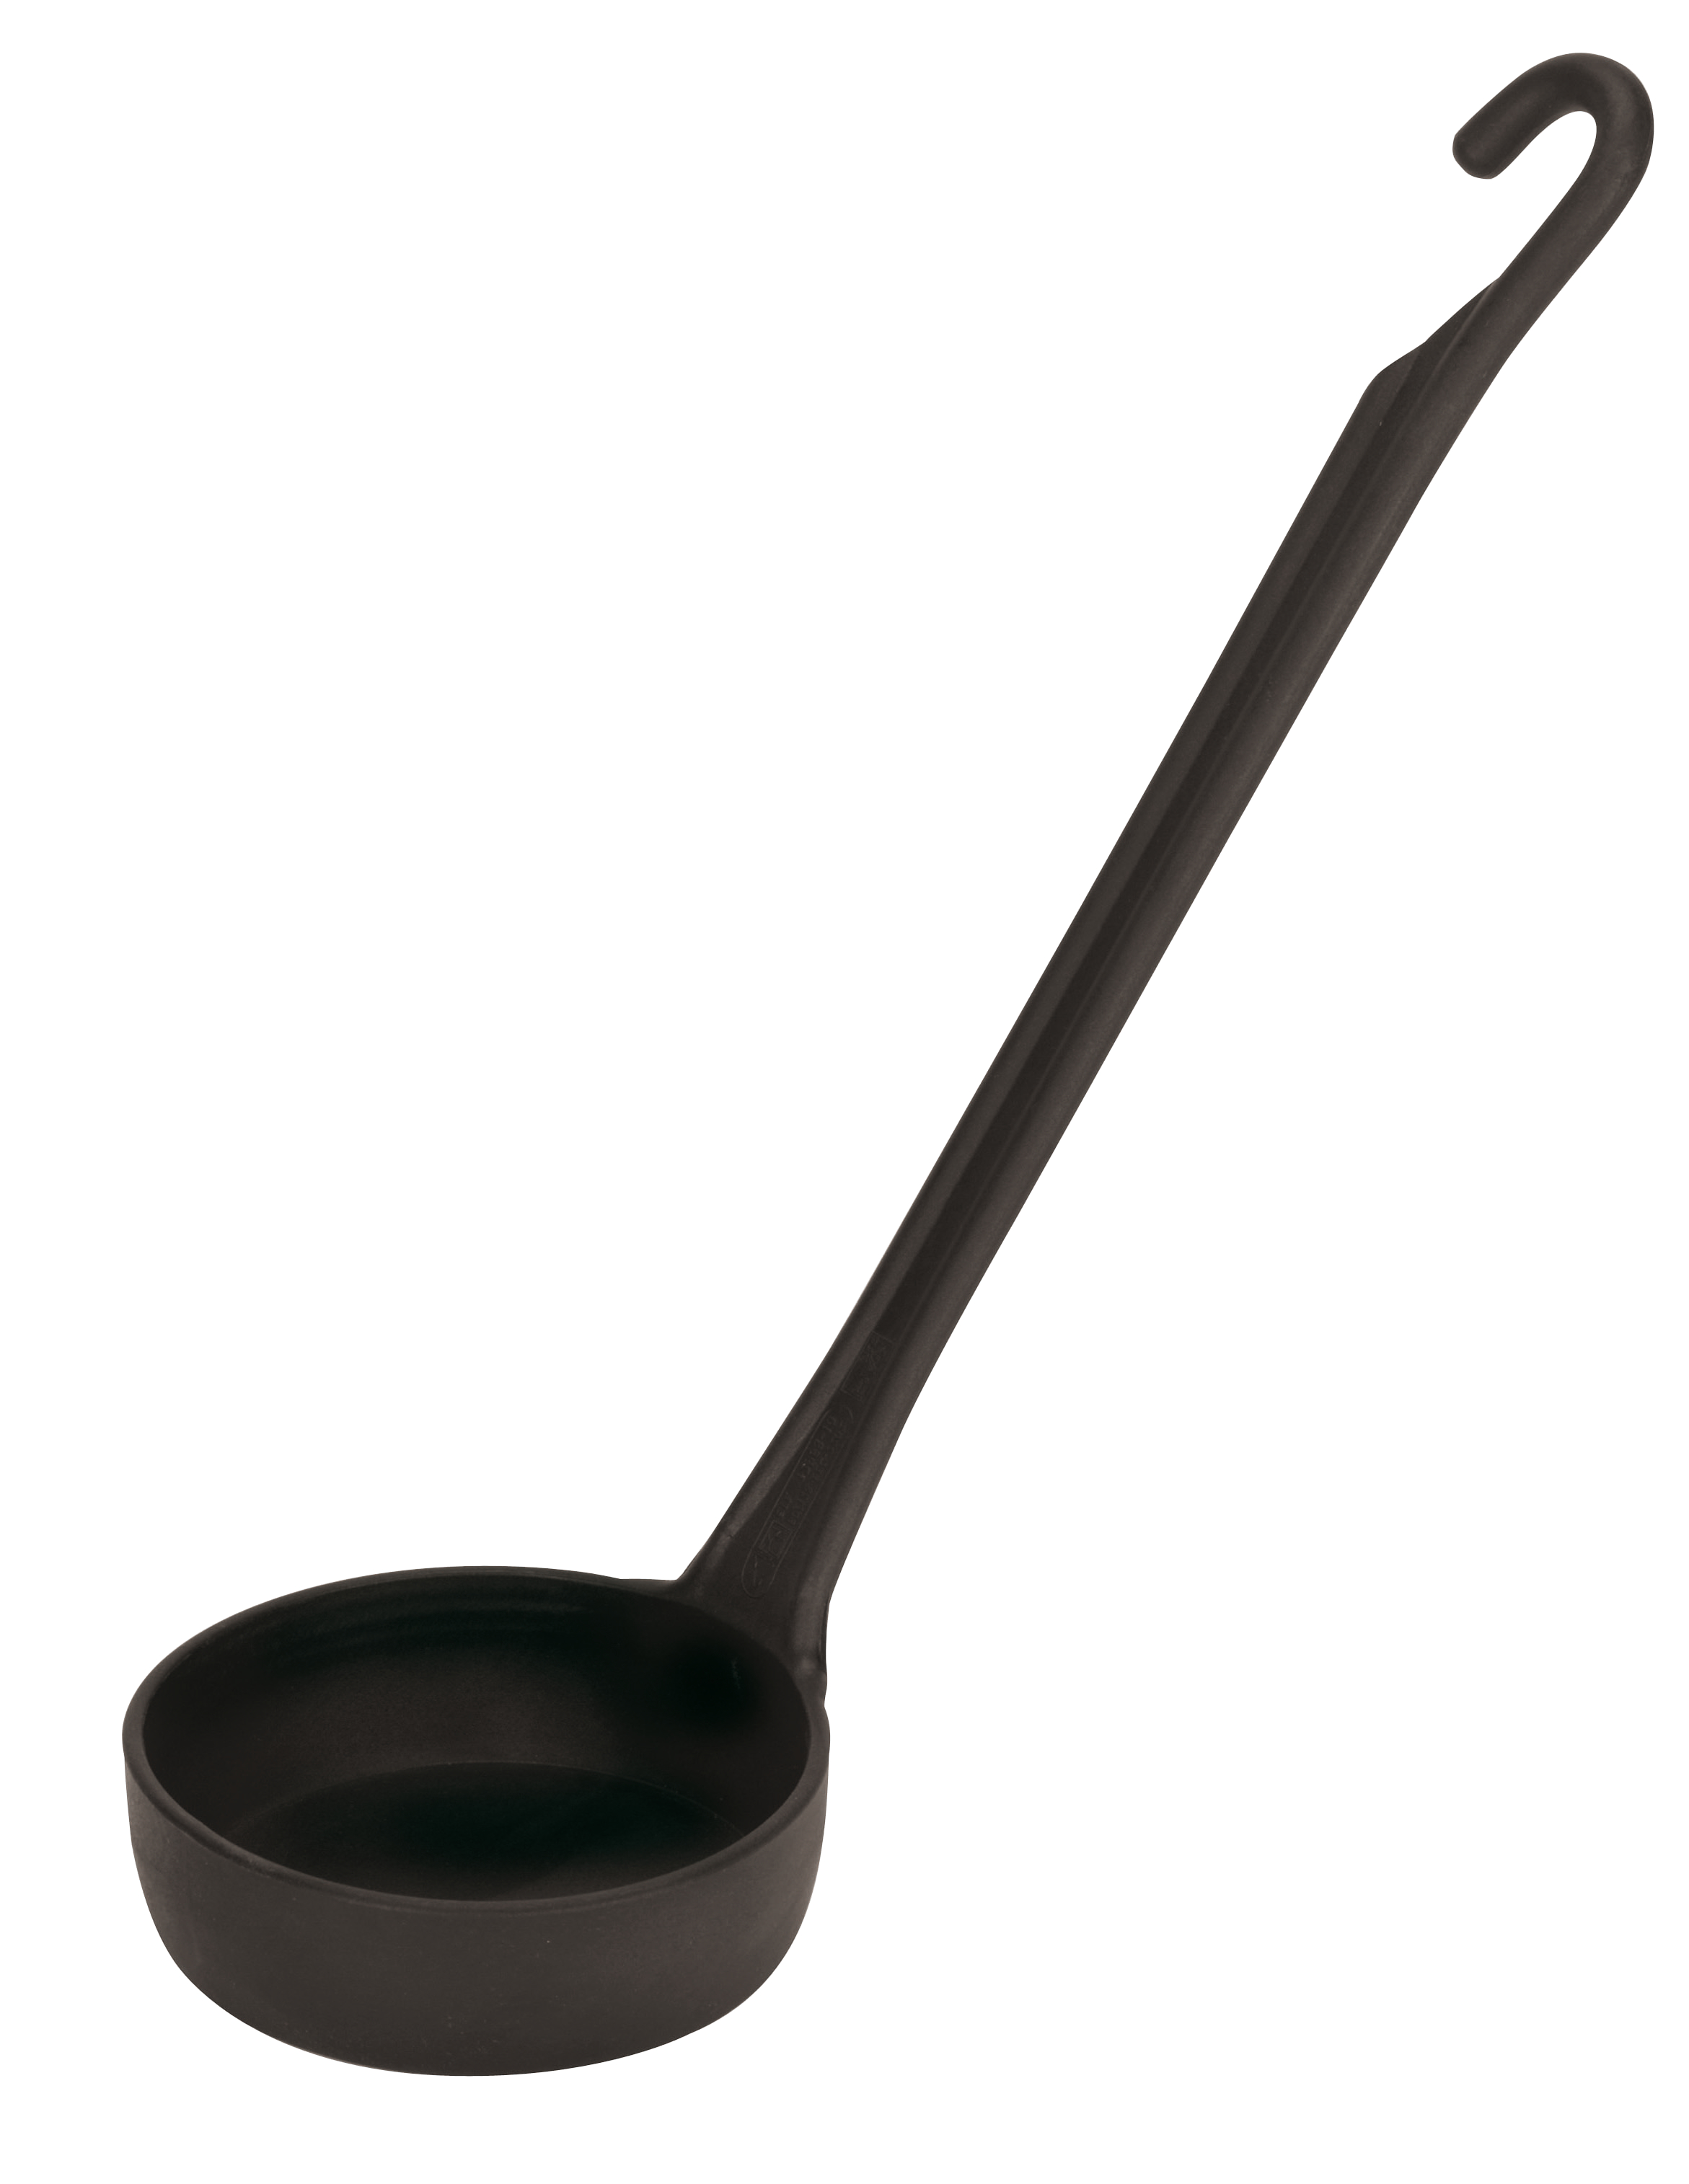 Non Stick Ladle Soup Spoon with Heat Resistant Long Wooden Handle for Kitchen Cacalee Stainless Steel Soup Spoon Ladle 